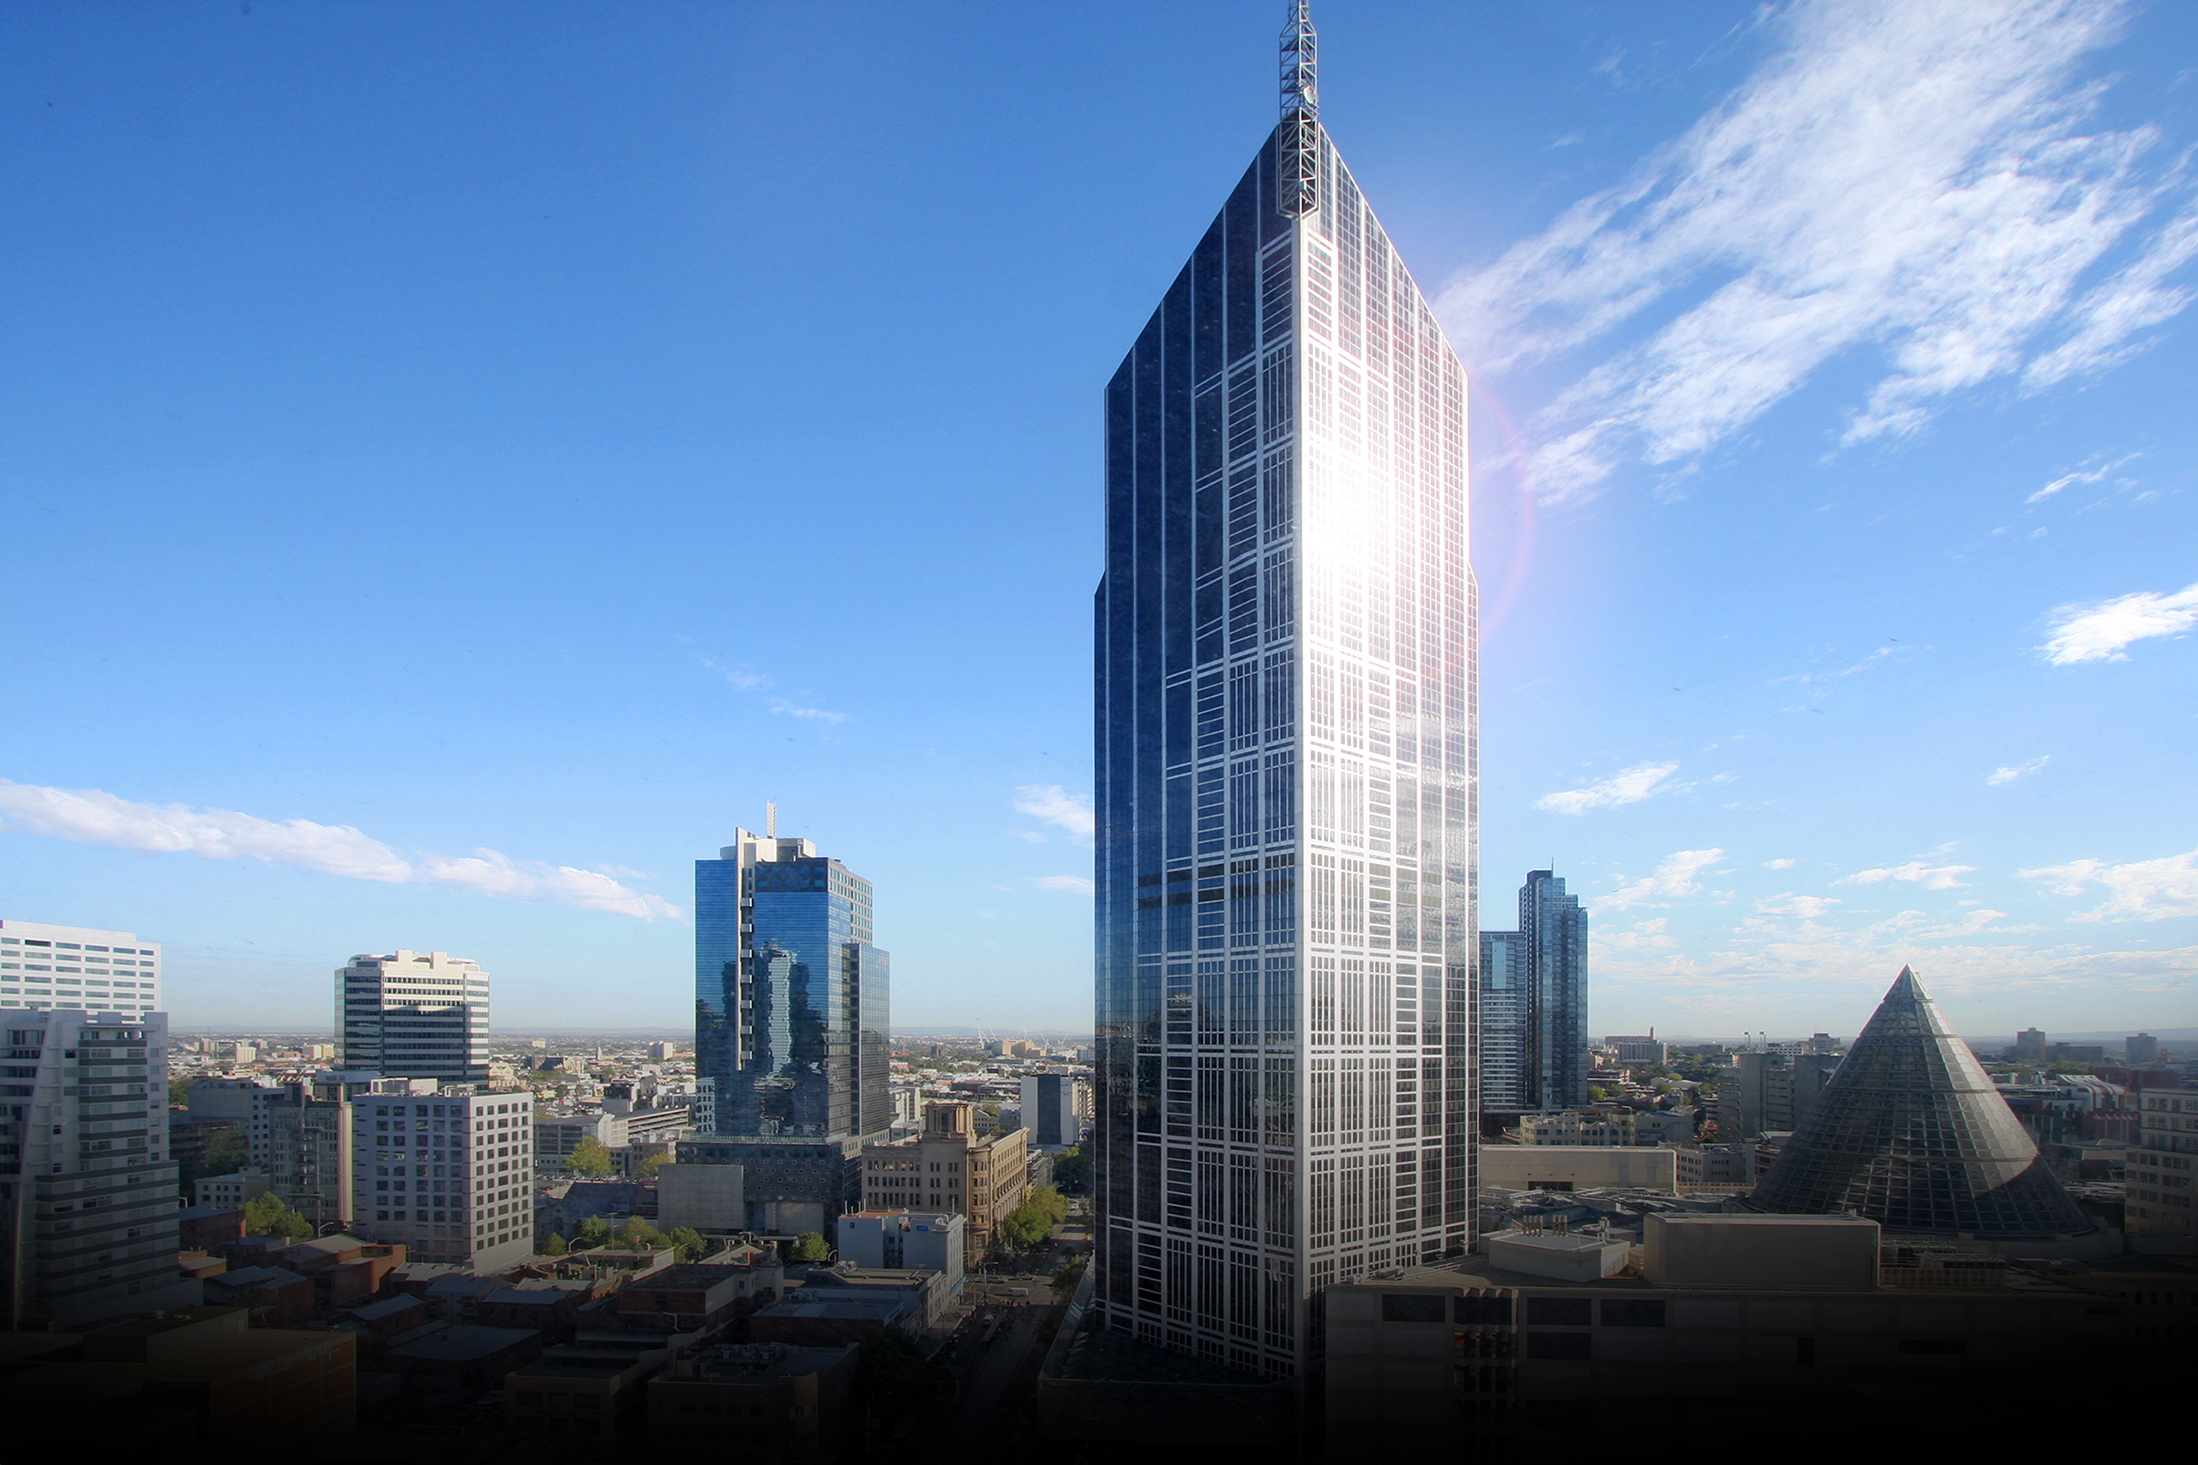 Melbourne Skyscrapers Architectural Photography - Real Estate